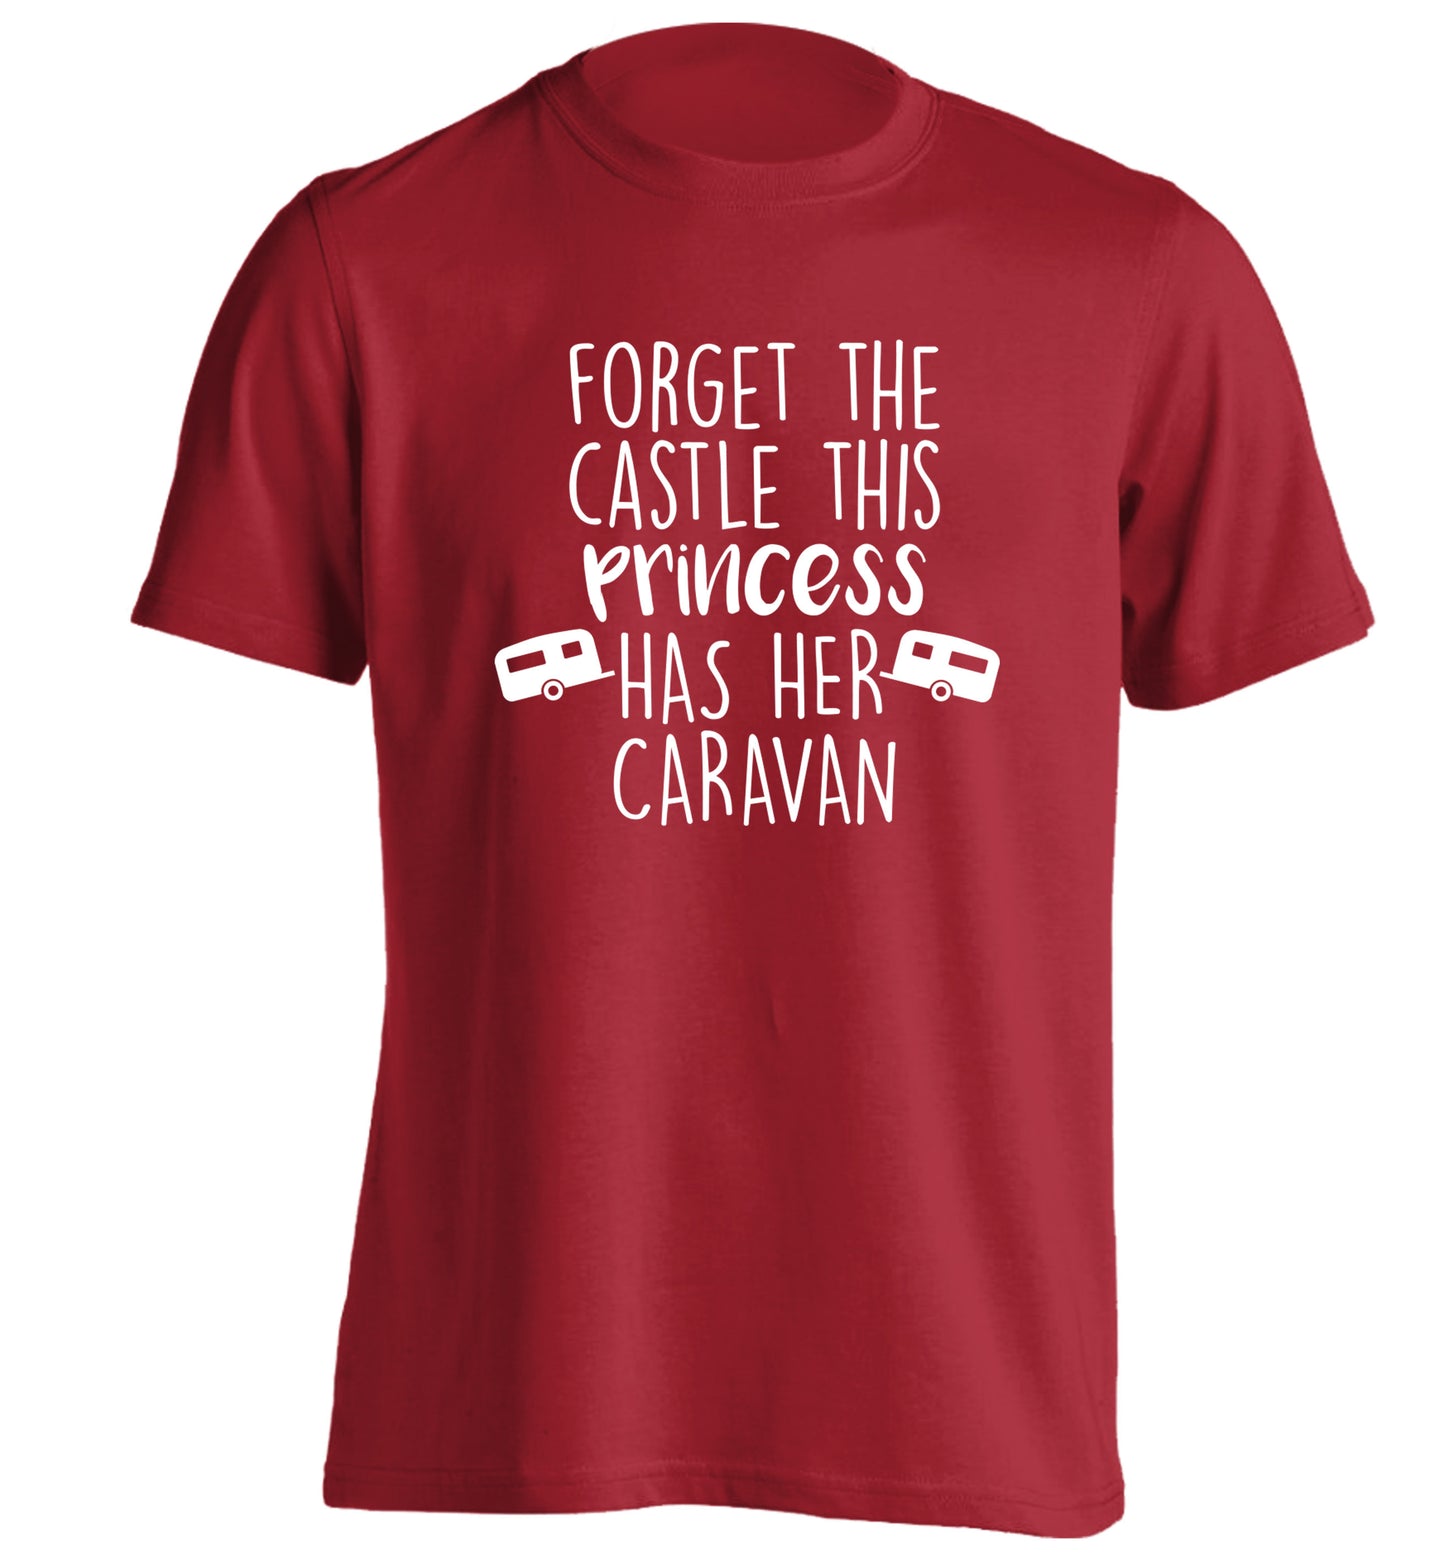 Forget the castle this princess lives at the caravan adults unisex red Tshirt 2XL